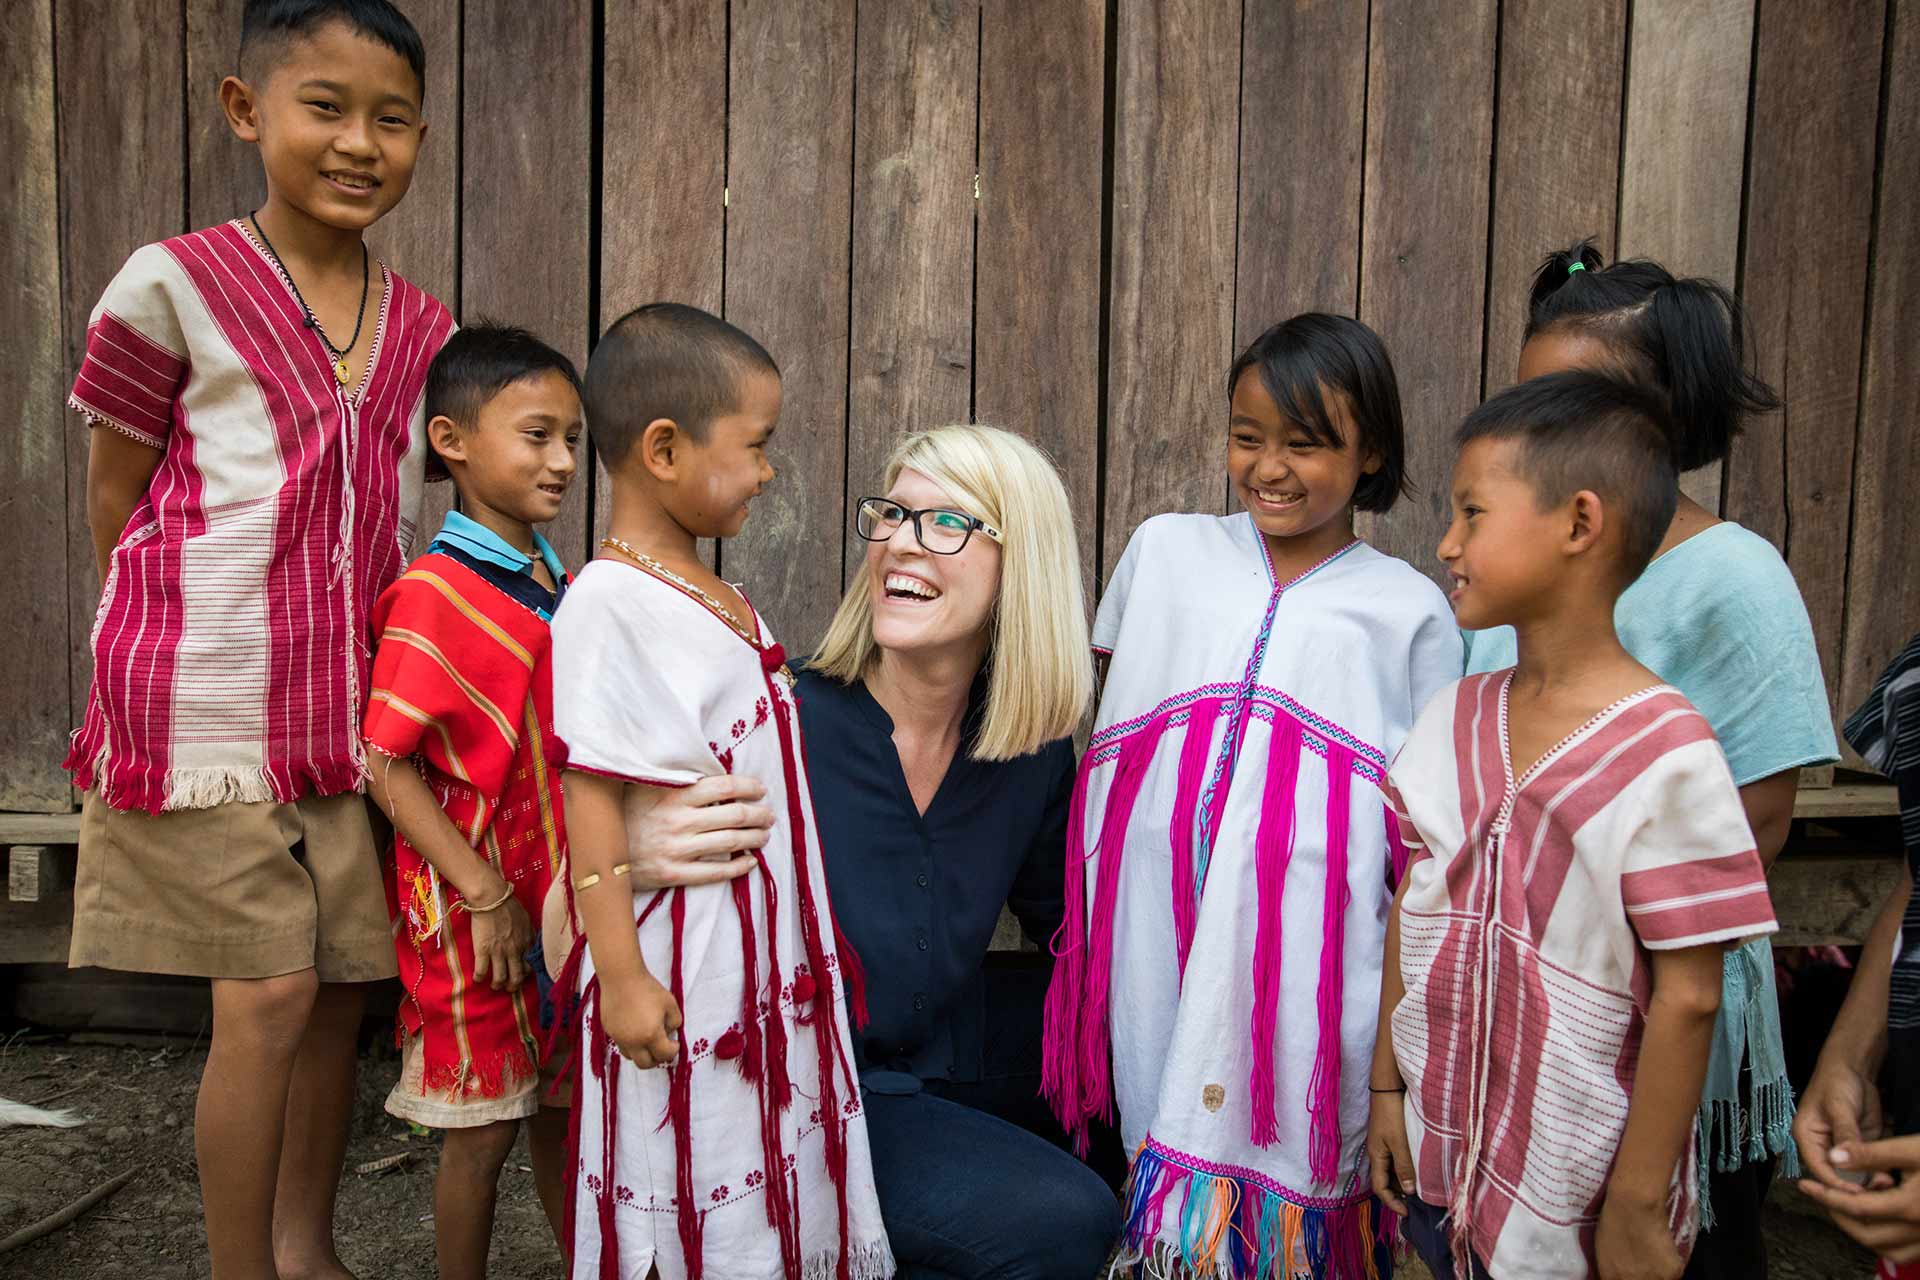 A blonde woman in a blue shirt crouches, surrounded by six children wearing colorful tribal shirts